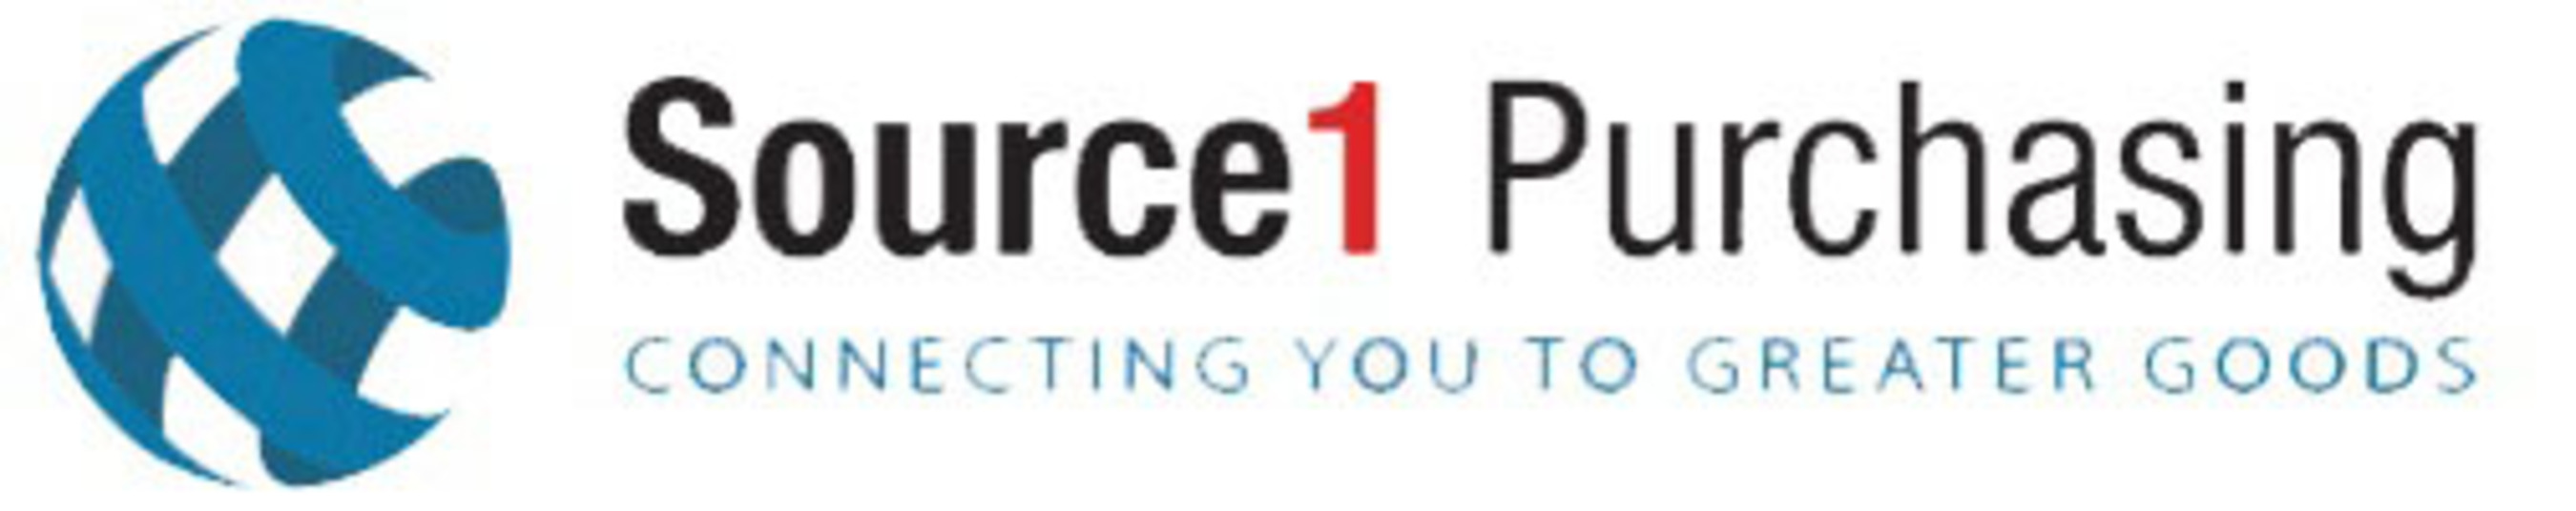 Source1 Purchasing Logo The Leverage of Billions